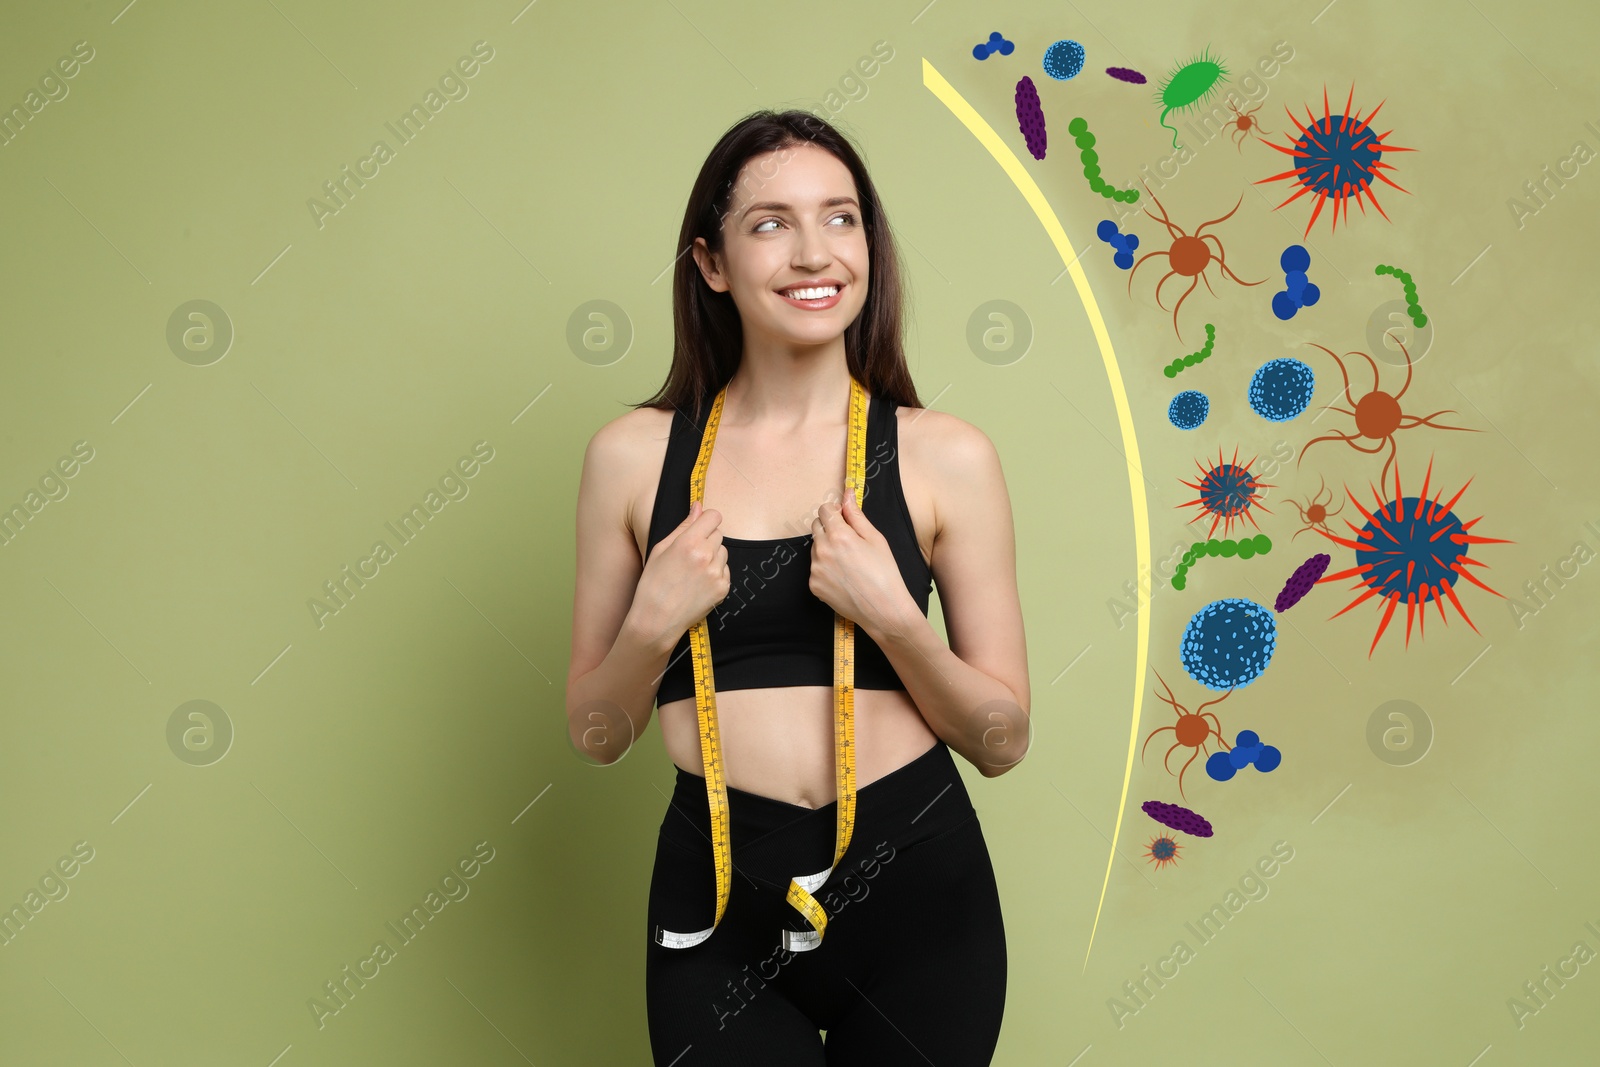 Image of Healthy sporty woman on olive background. Strong immunity - shield against viruses